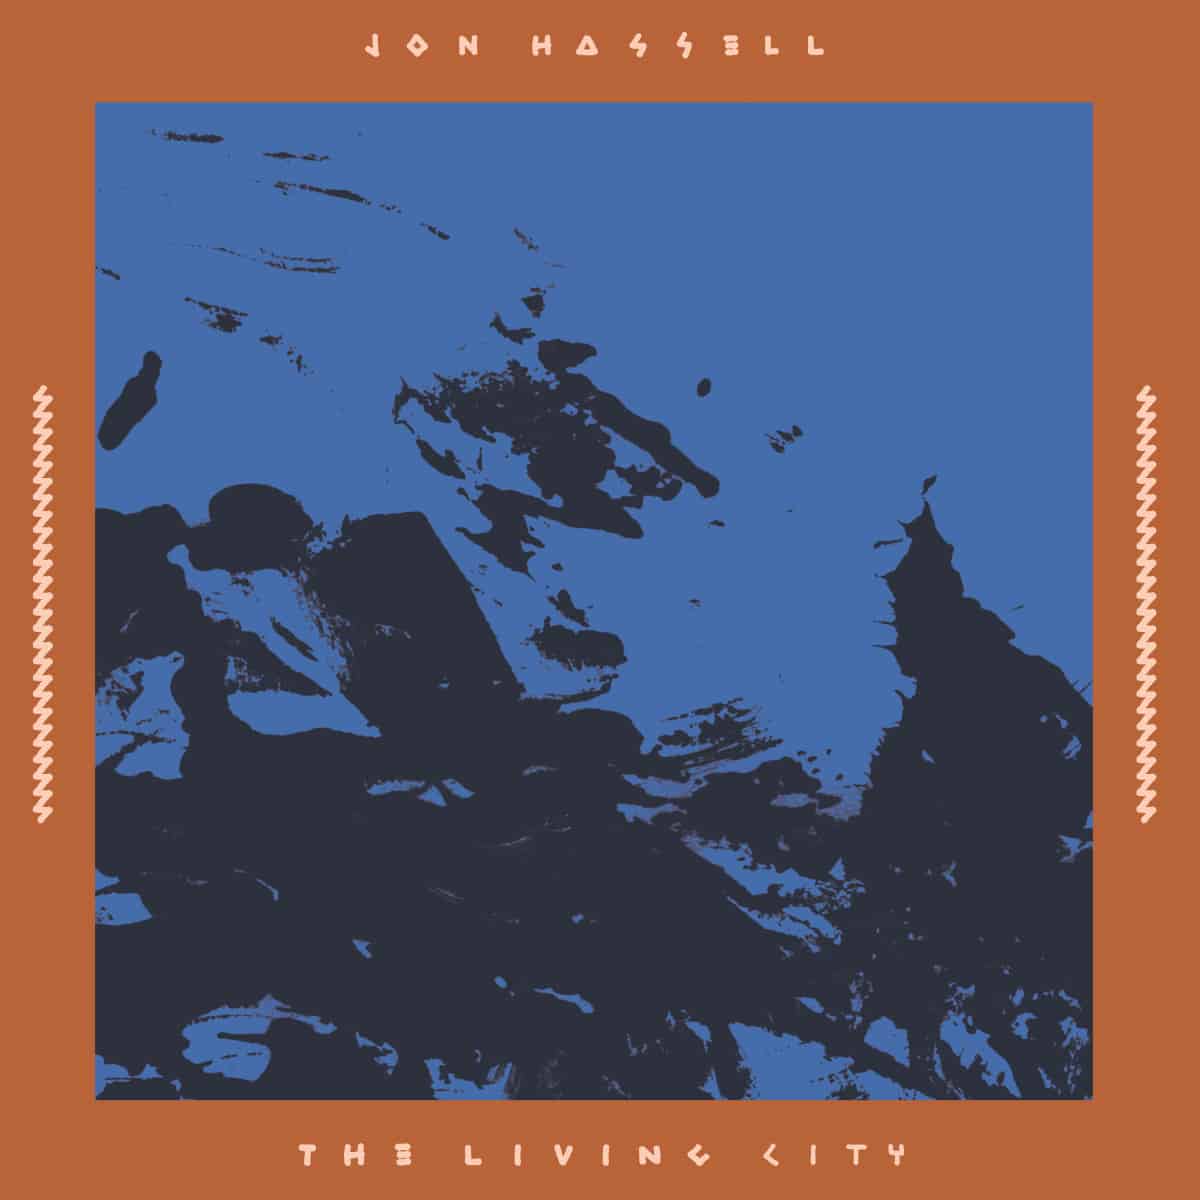 Jon Hassell - The Living City (Live at the Winter Garden 17.09.89)